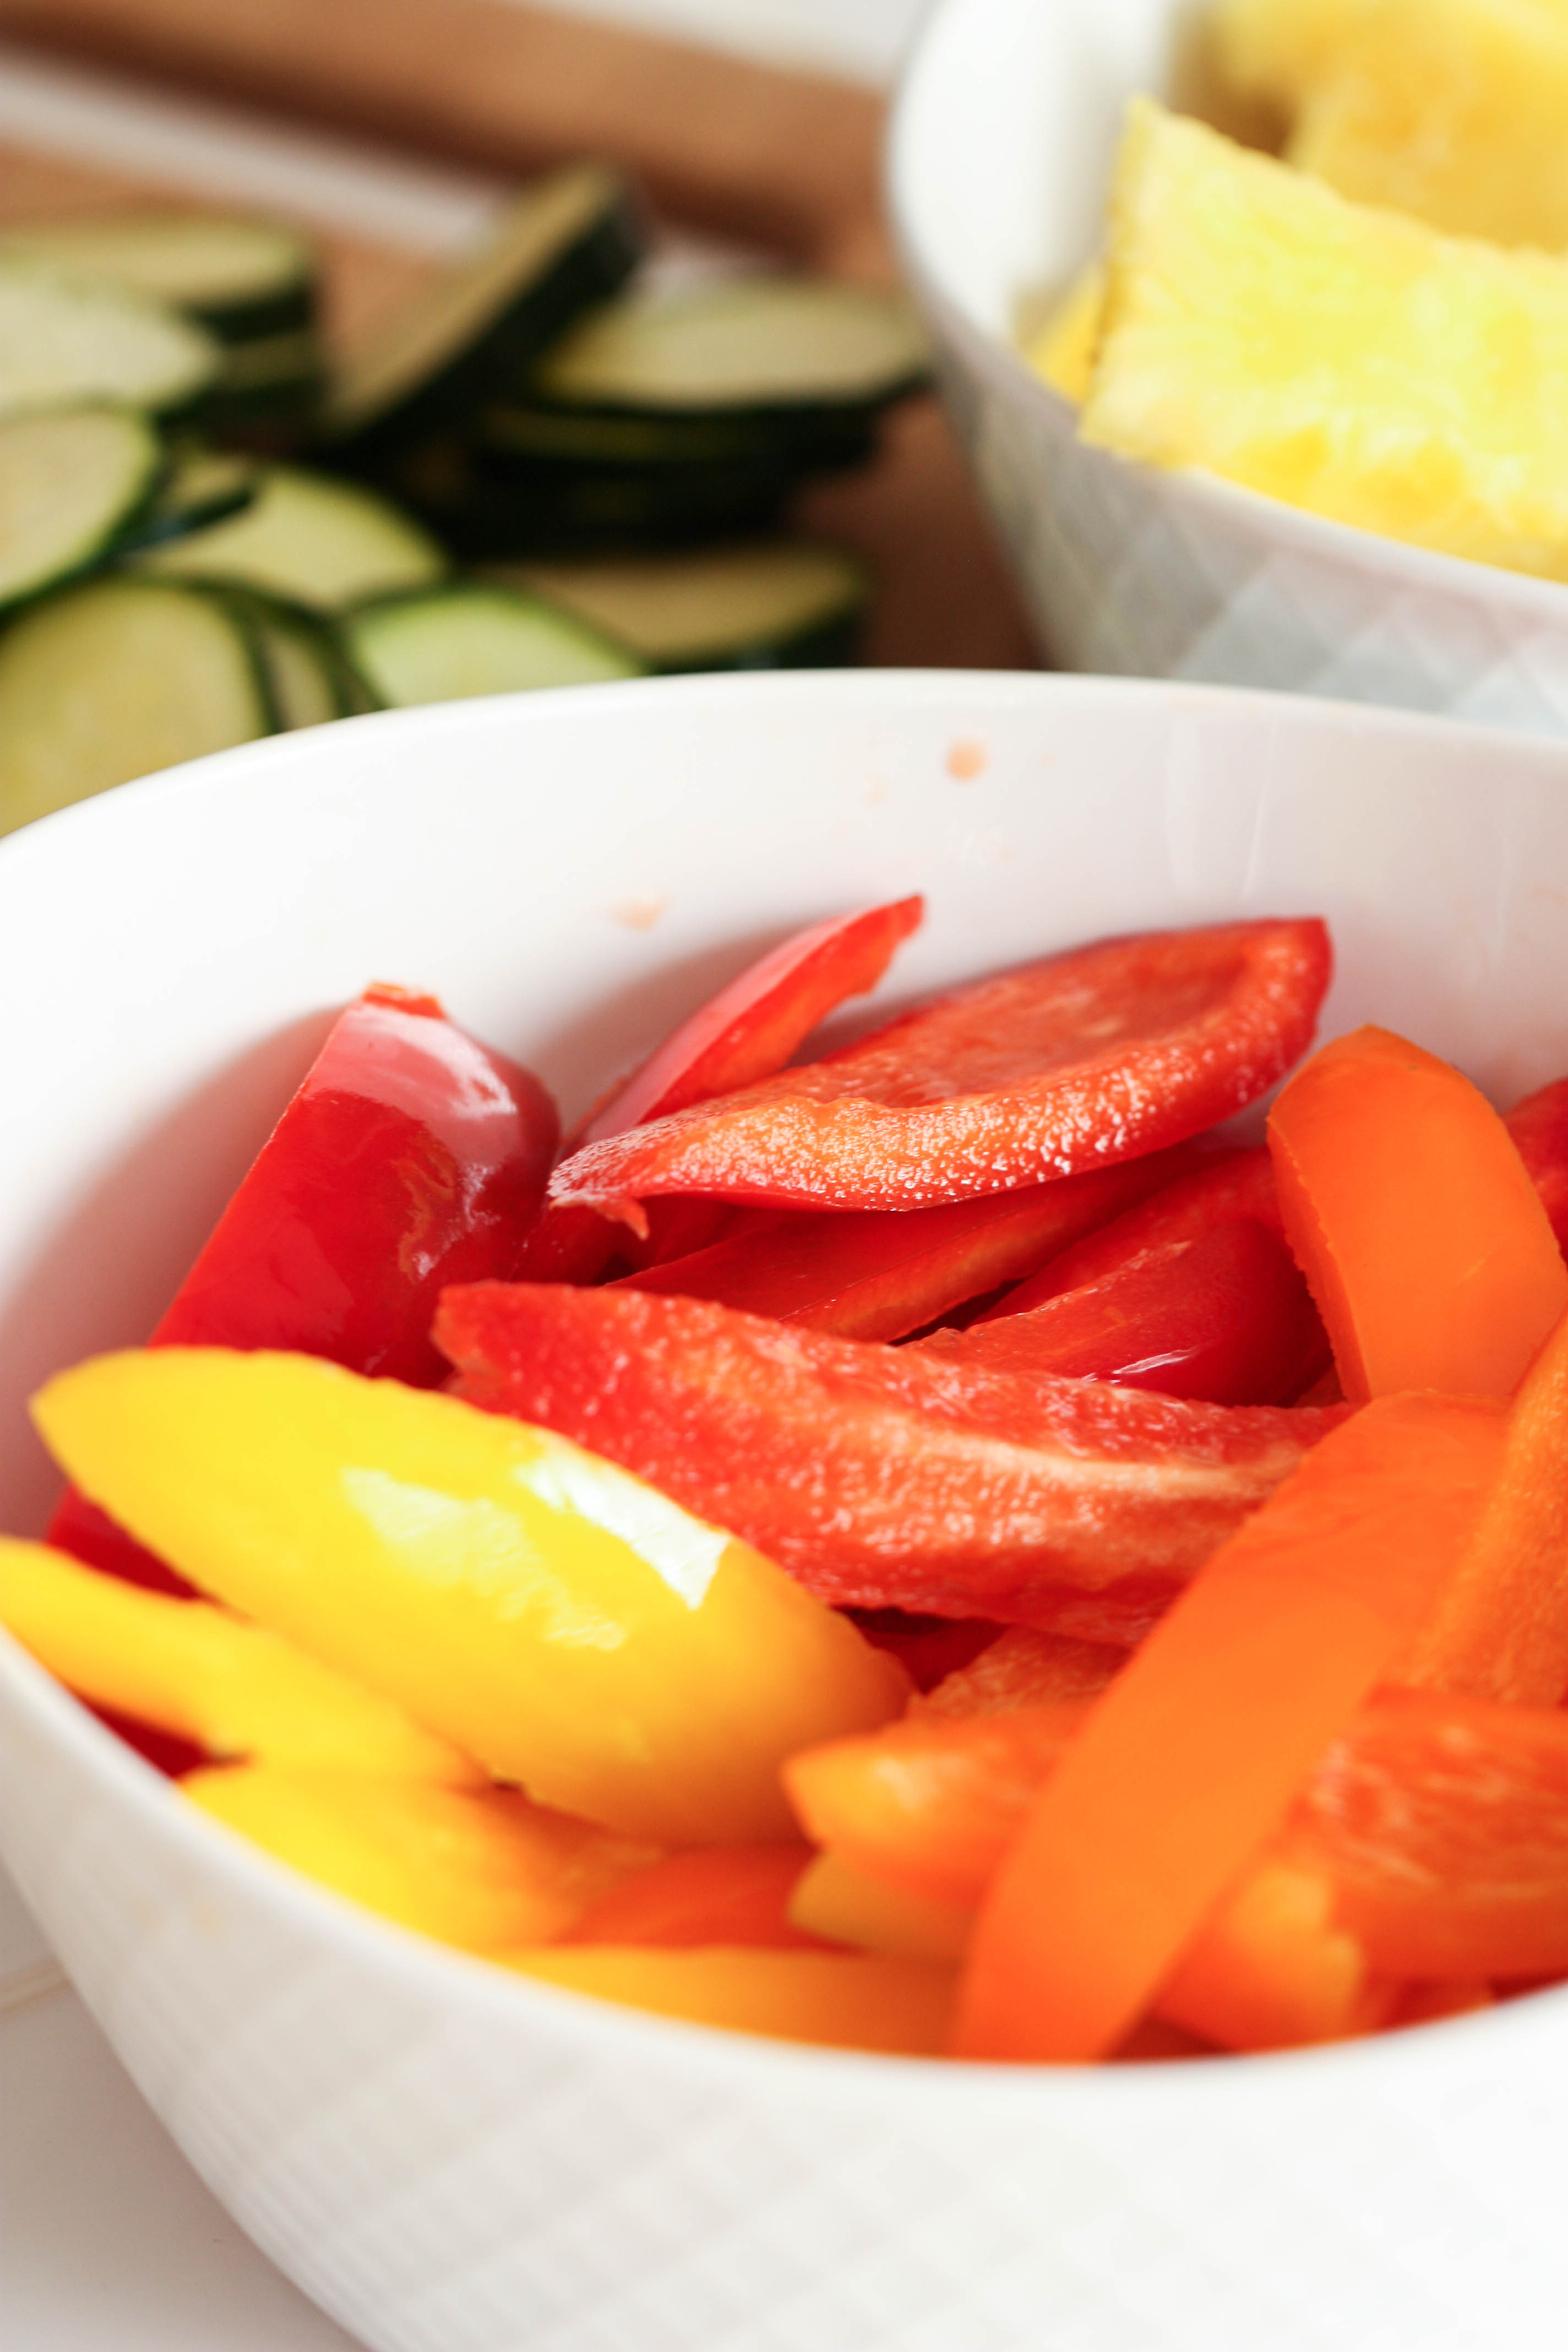 3 kinds of chopped pepper this recipe: red, yellow, and orange